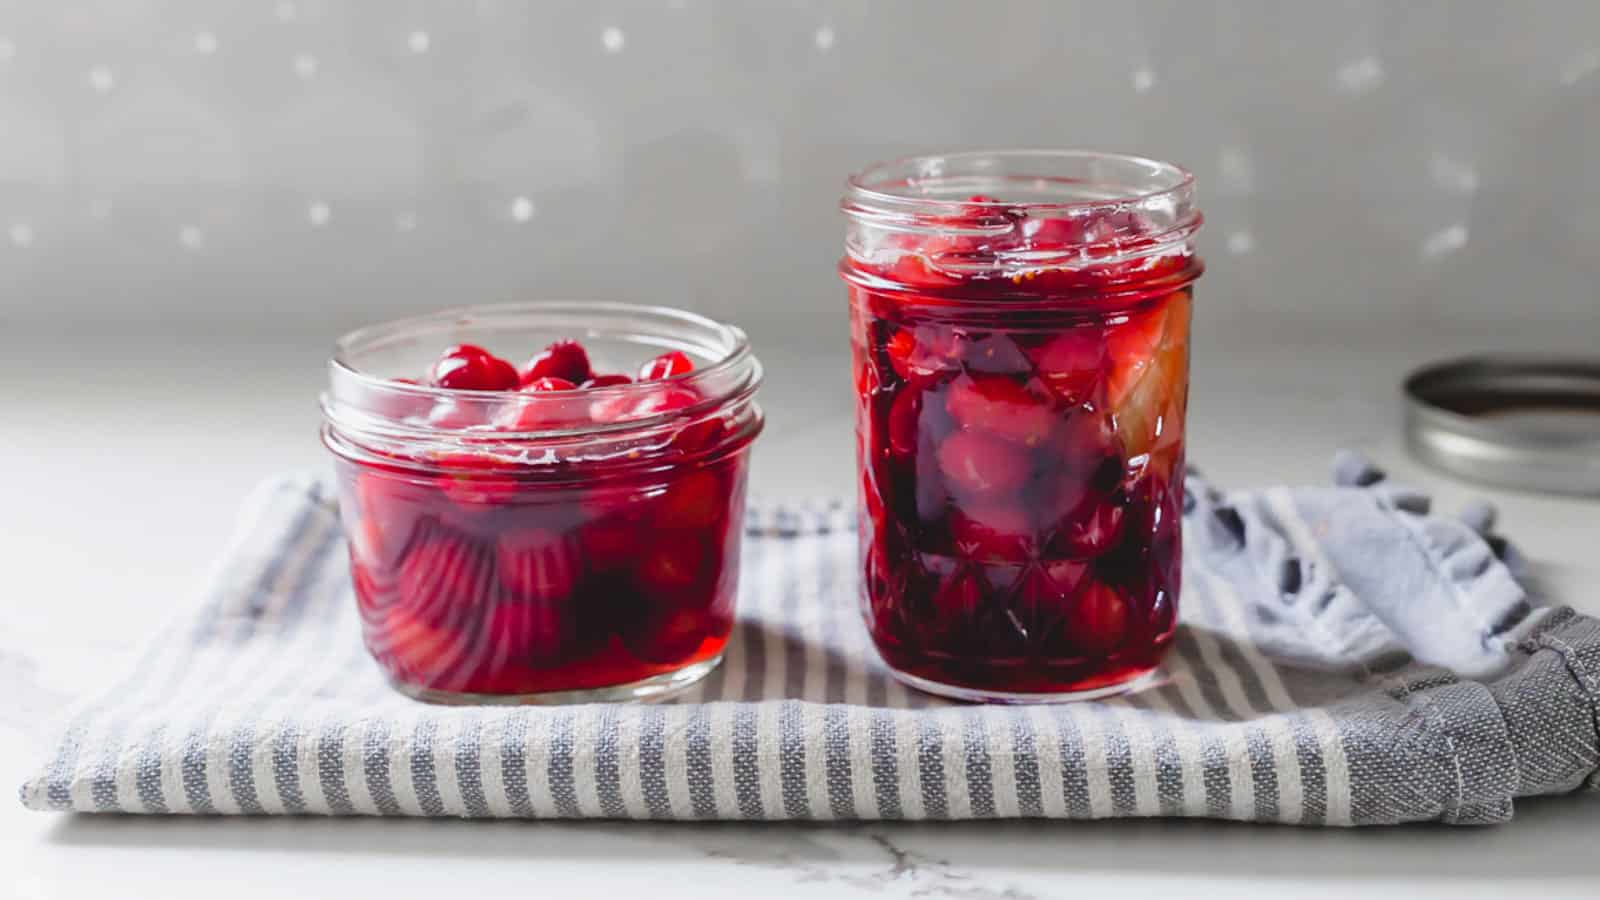 Two jars of pickled cranberries on a kitchen towel.